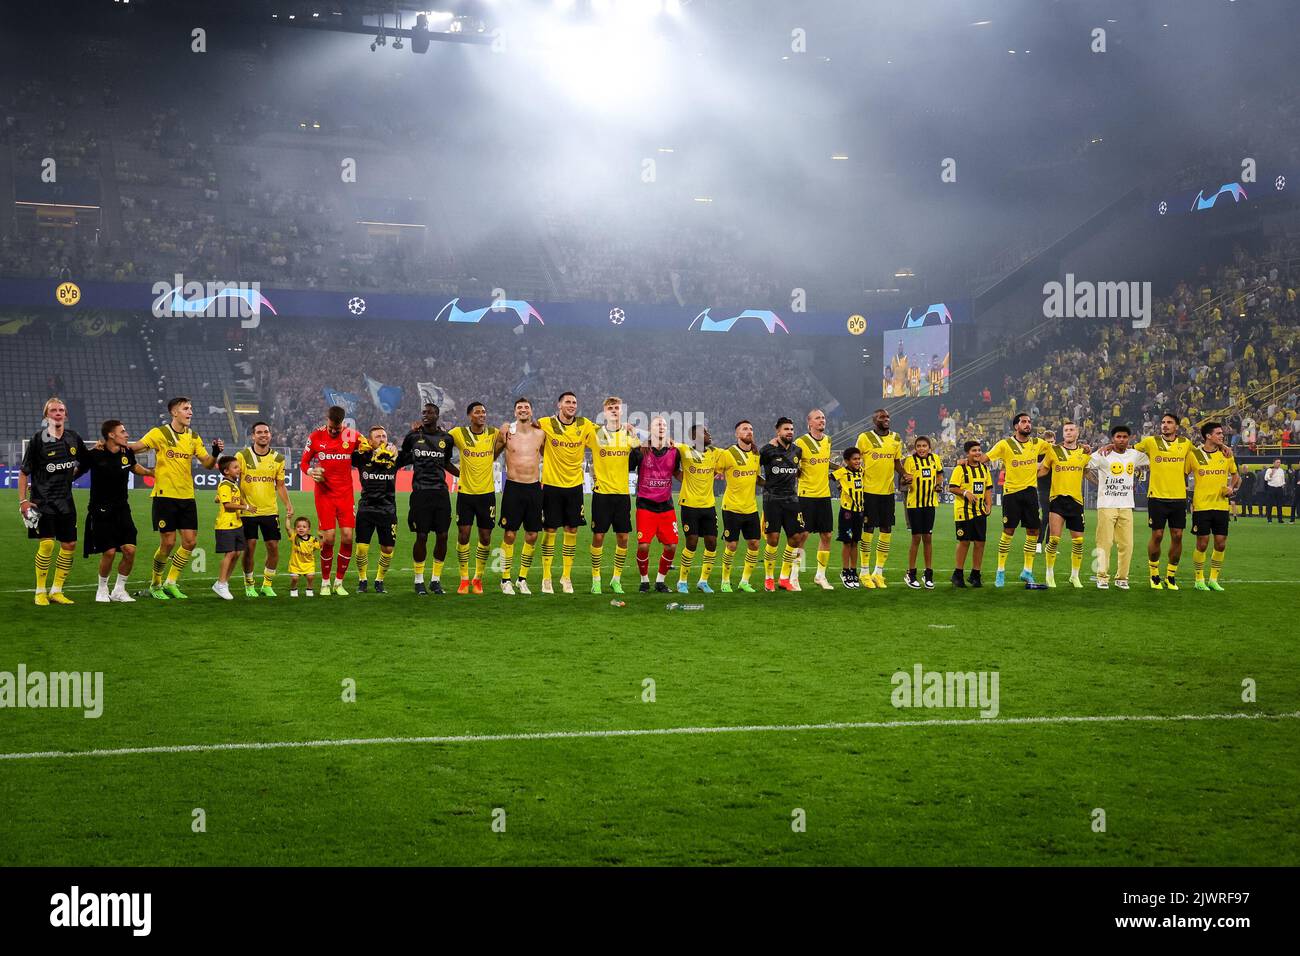 DORTMUND, GERMANY - SEPTEMBER 6: Giovanni Reyna of Borussia Dortmund, Mats Hummels of Borussia Dortmund, Emre Can, Antonios Papadopoulos, Alexander Meyer of Borussia Dortmund, Thomas Meunier of Borussia Dortmund, Niklas Sule of Borussia Dortmund, Nico Schlotterbeck of Borussia Dortmund, Raphael Guerreiro of Borussia Dortmund, Jude Bellingham of Borussia Dortmund, Salih Ozcan of Borussia Dortmund, Julian Brandt of Borussia Dortmund, Marco Reus of Borussia Dortmund, Thorgan Hazard of Borussia Dortmund and Anthony Modeste of Borussia Dortmund during the UEFA Champions League Group G match between Stock Photo